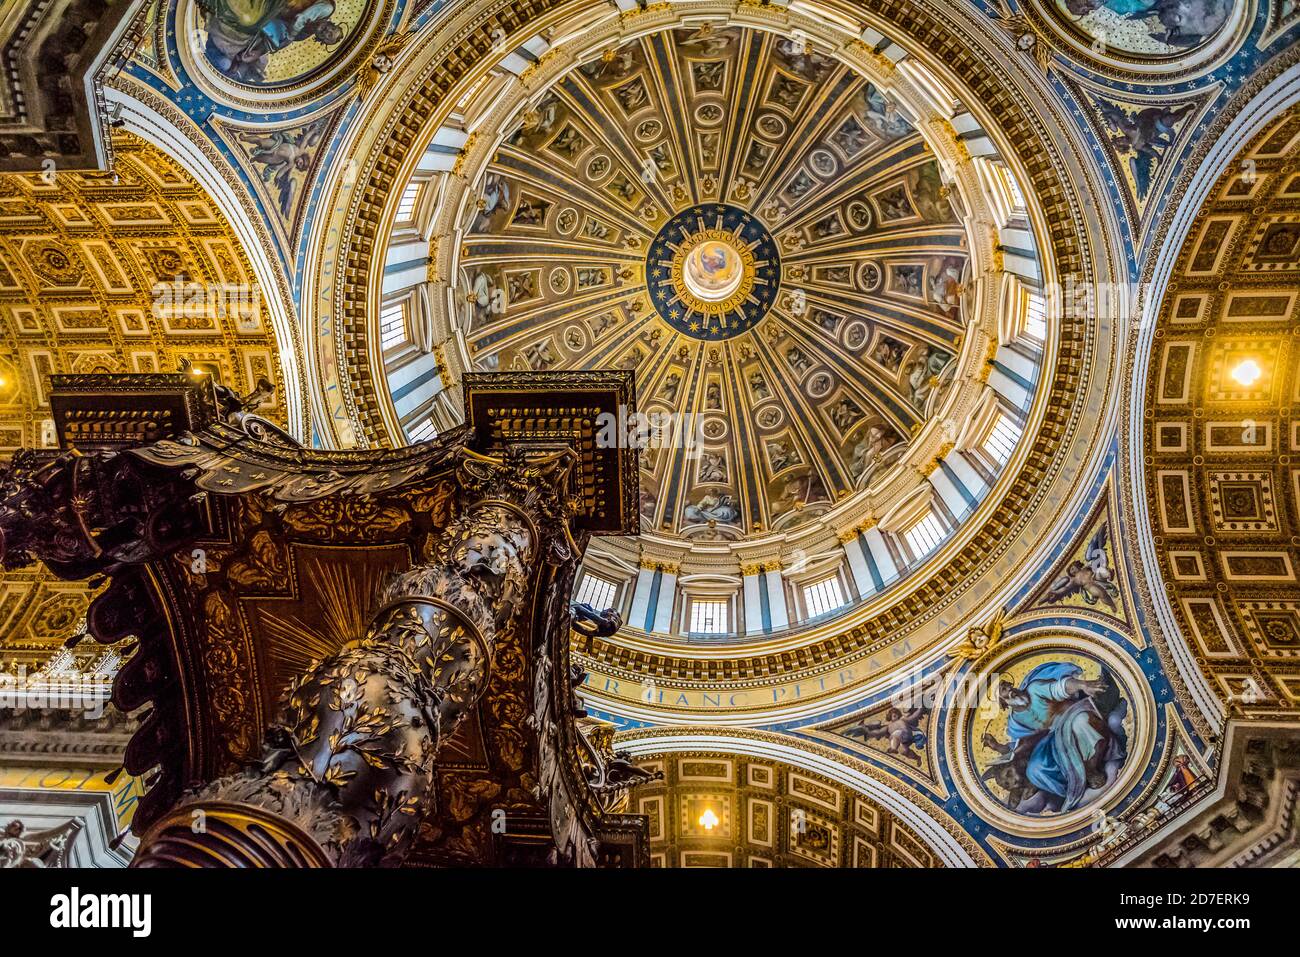 ROME, ITALY - SEPTEMBER 27, 2018: Bottom view of St. Peter's Baldachin designed by Gian Lorenzo Bernini in 1634 against the dome of the St. Peter's Ba Stock Photo